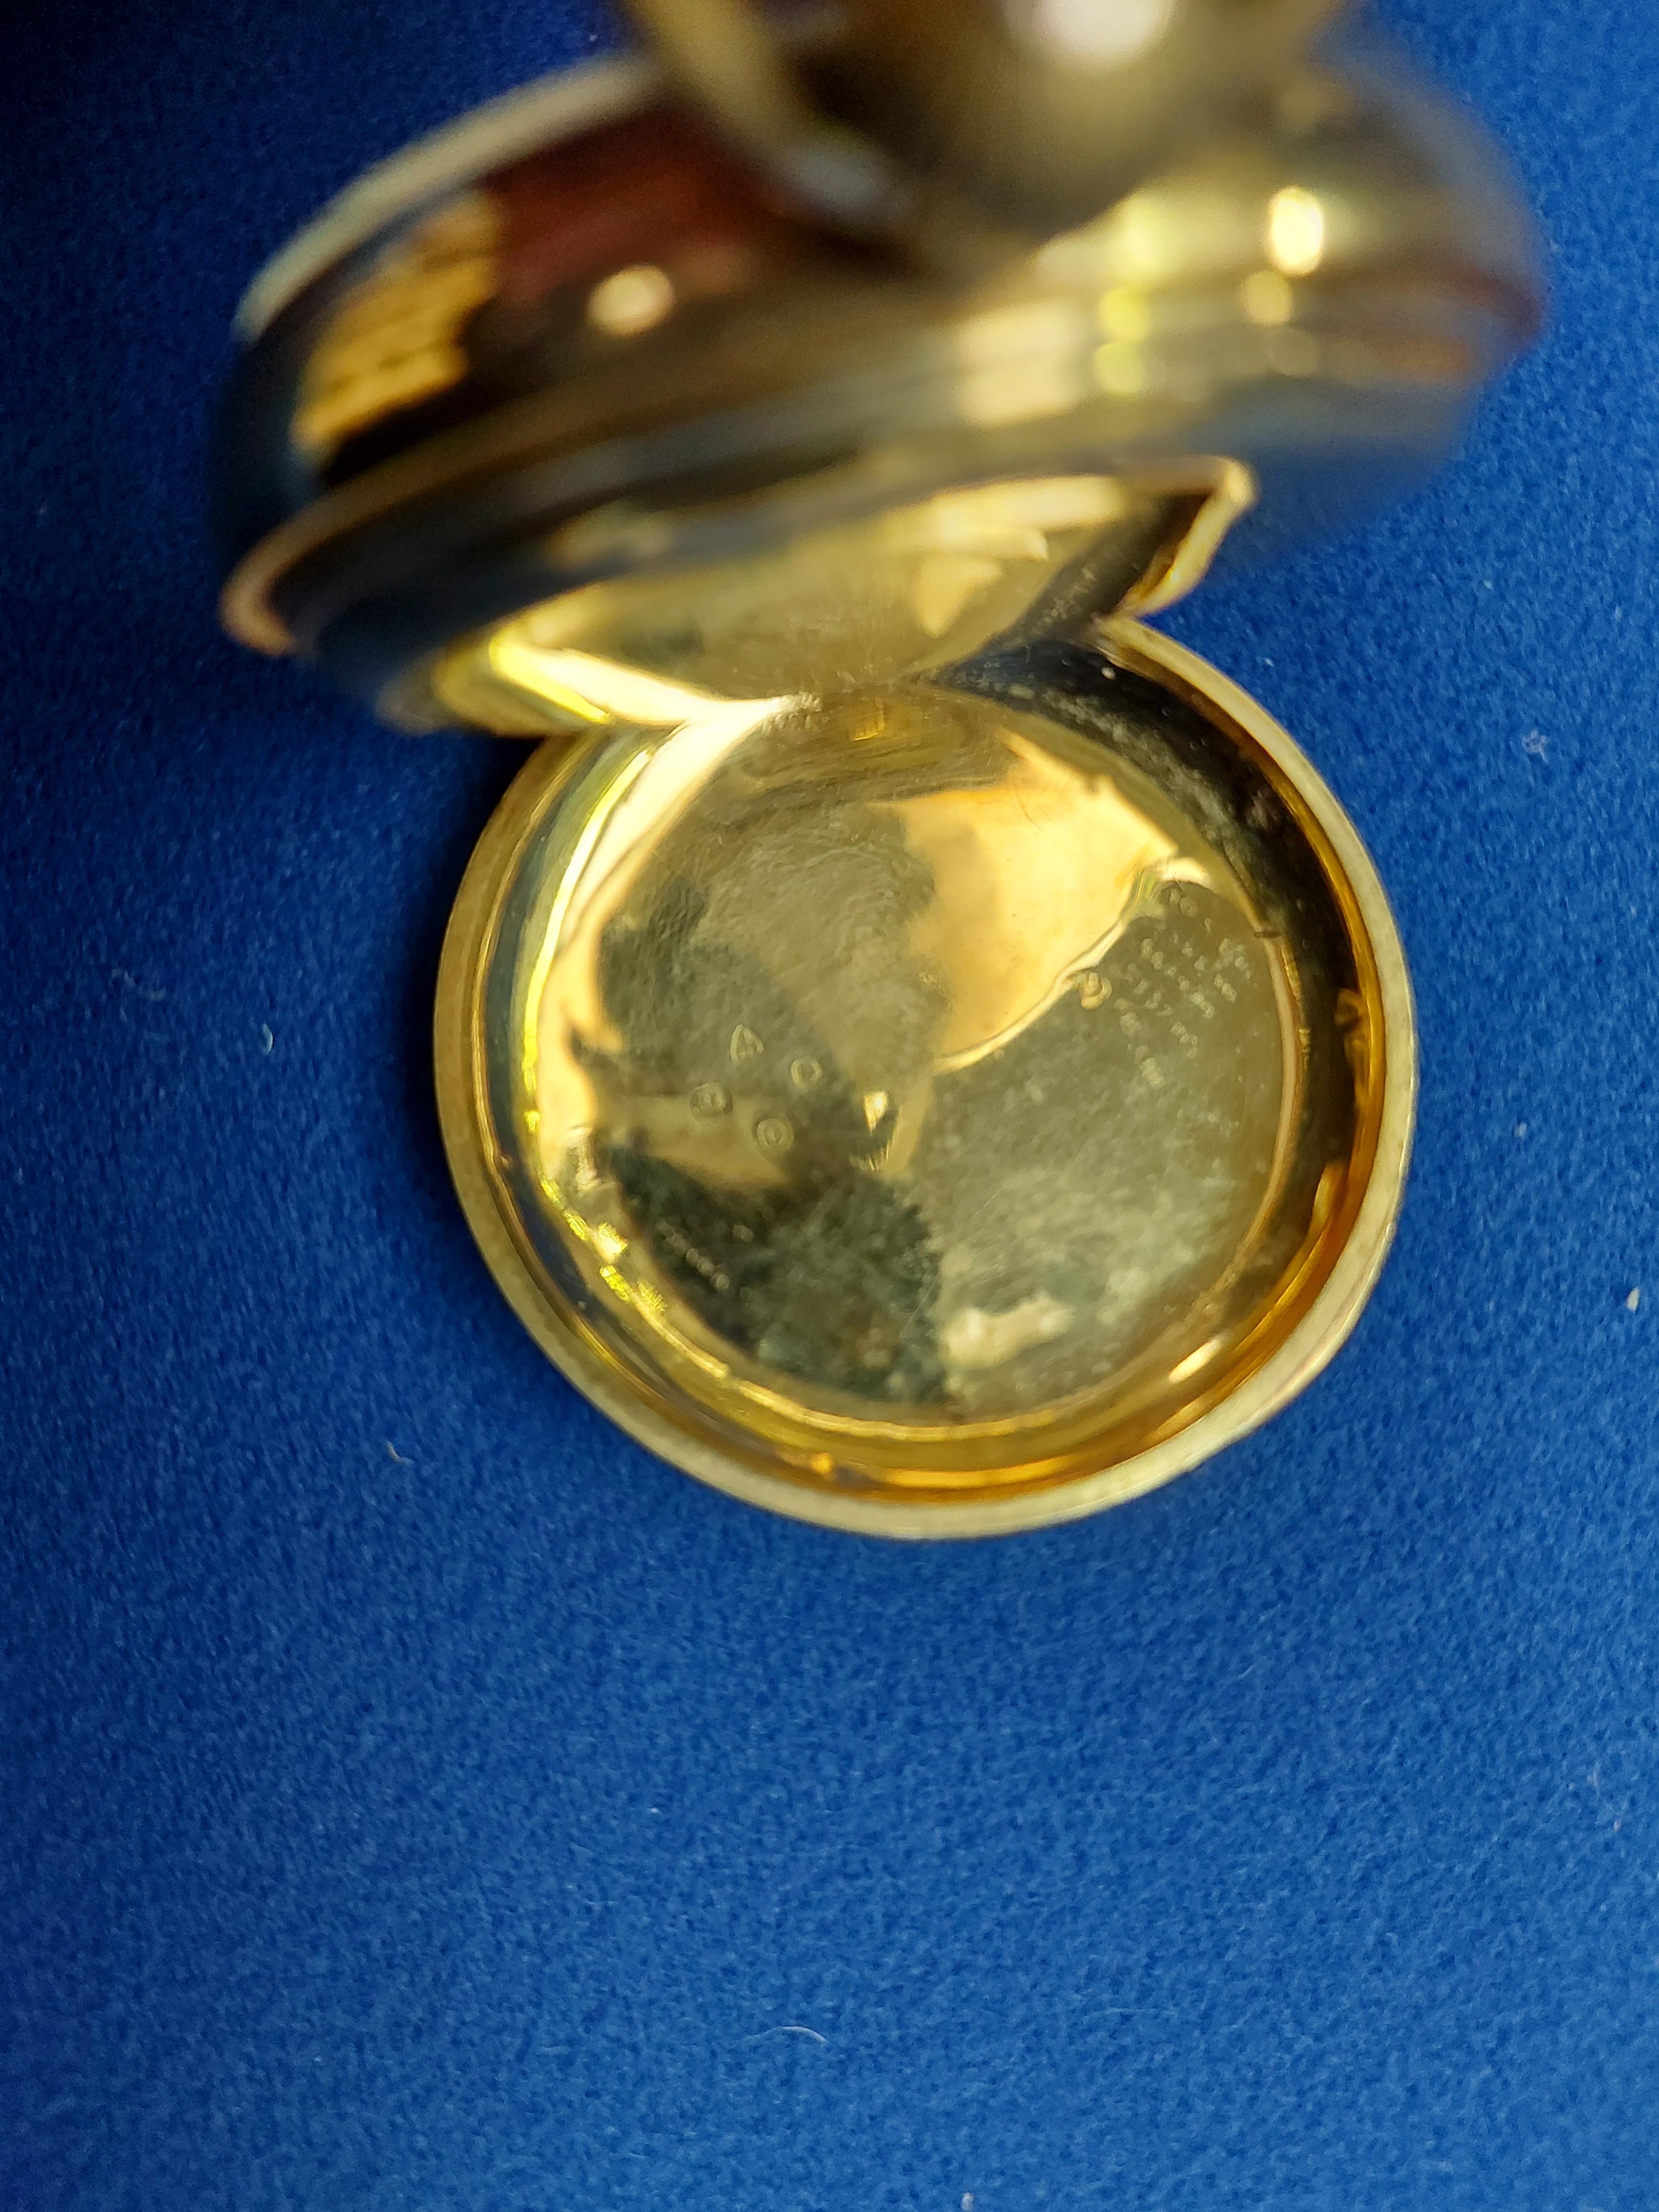 18ct Gold pocket watch (Working order) total weight 98g - Image 3 of 3